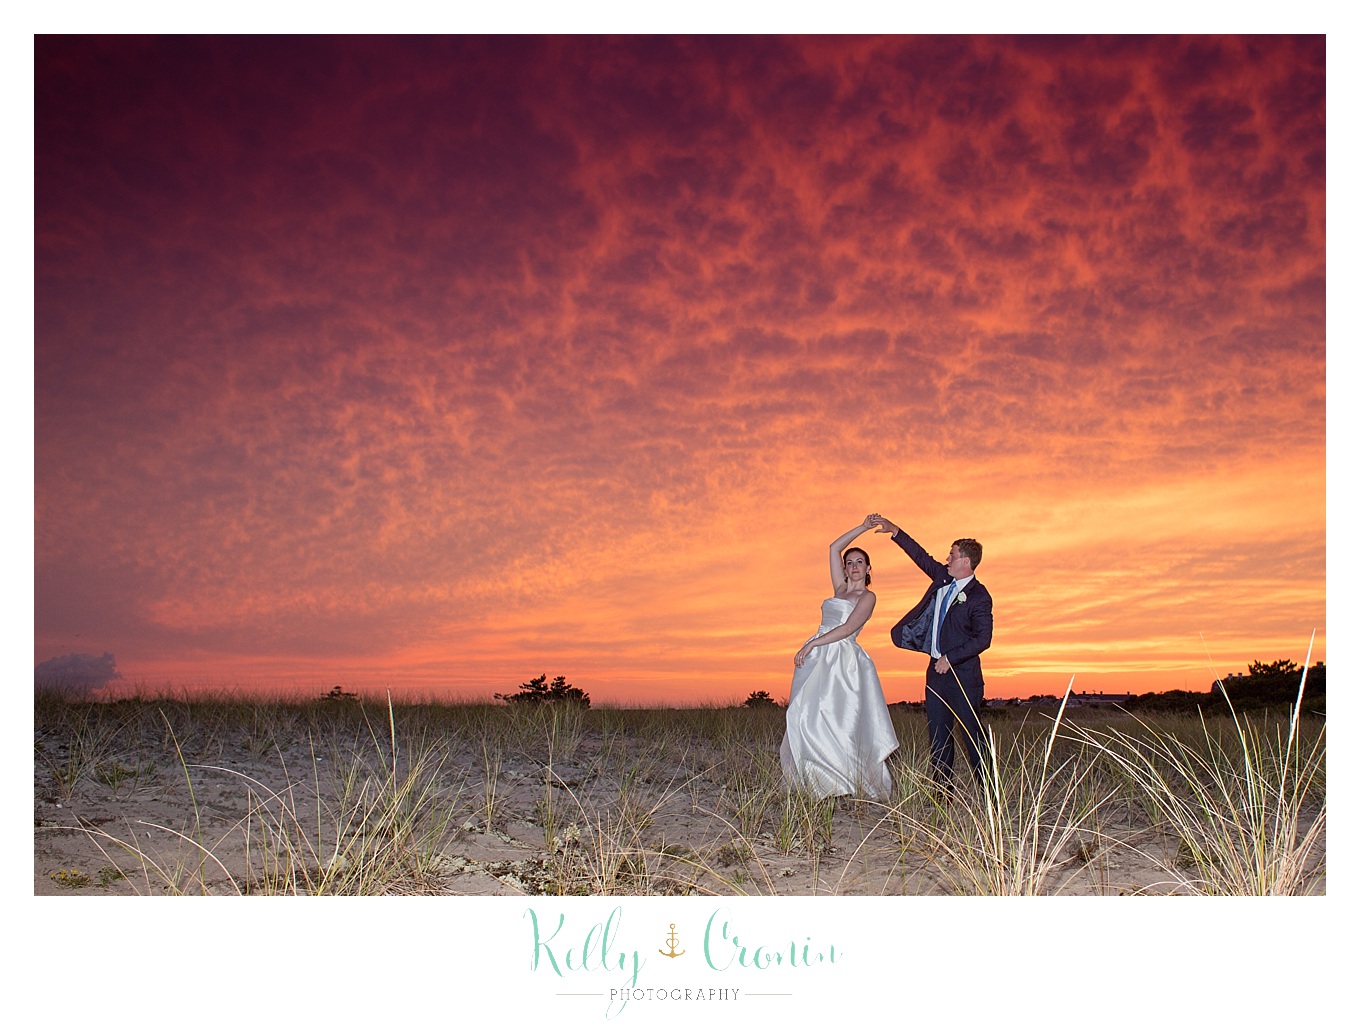 A couple dance in front of a golden sky | Kelly Cronin Photography | Cape Cod Wedding Photographer